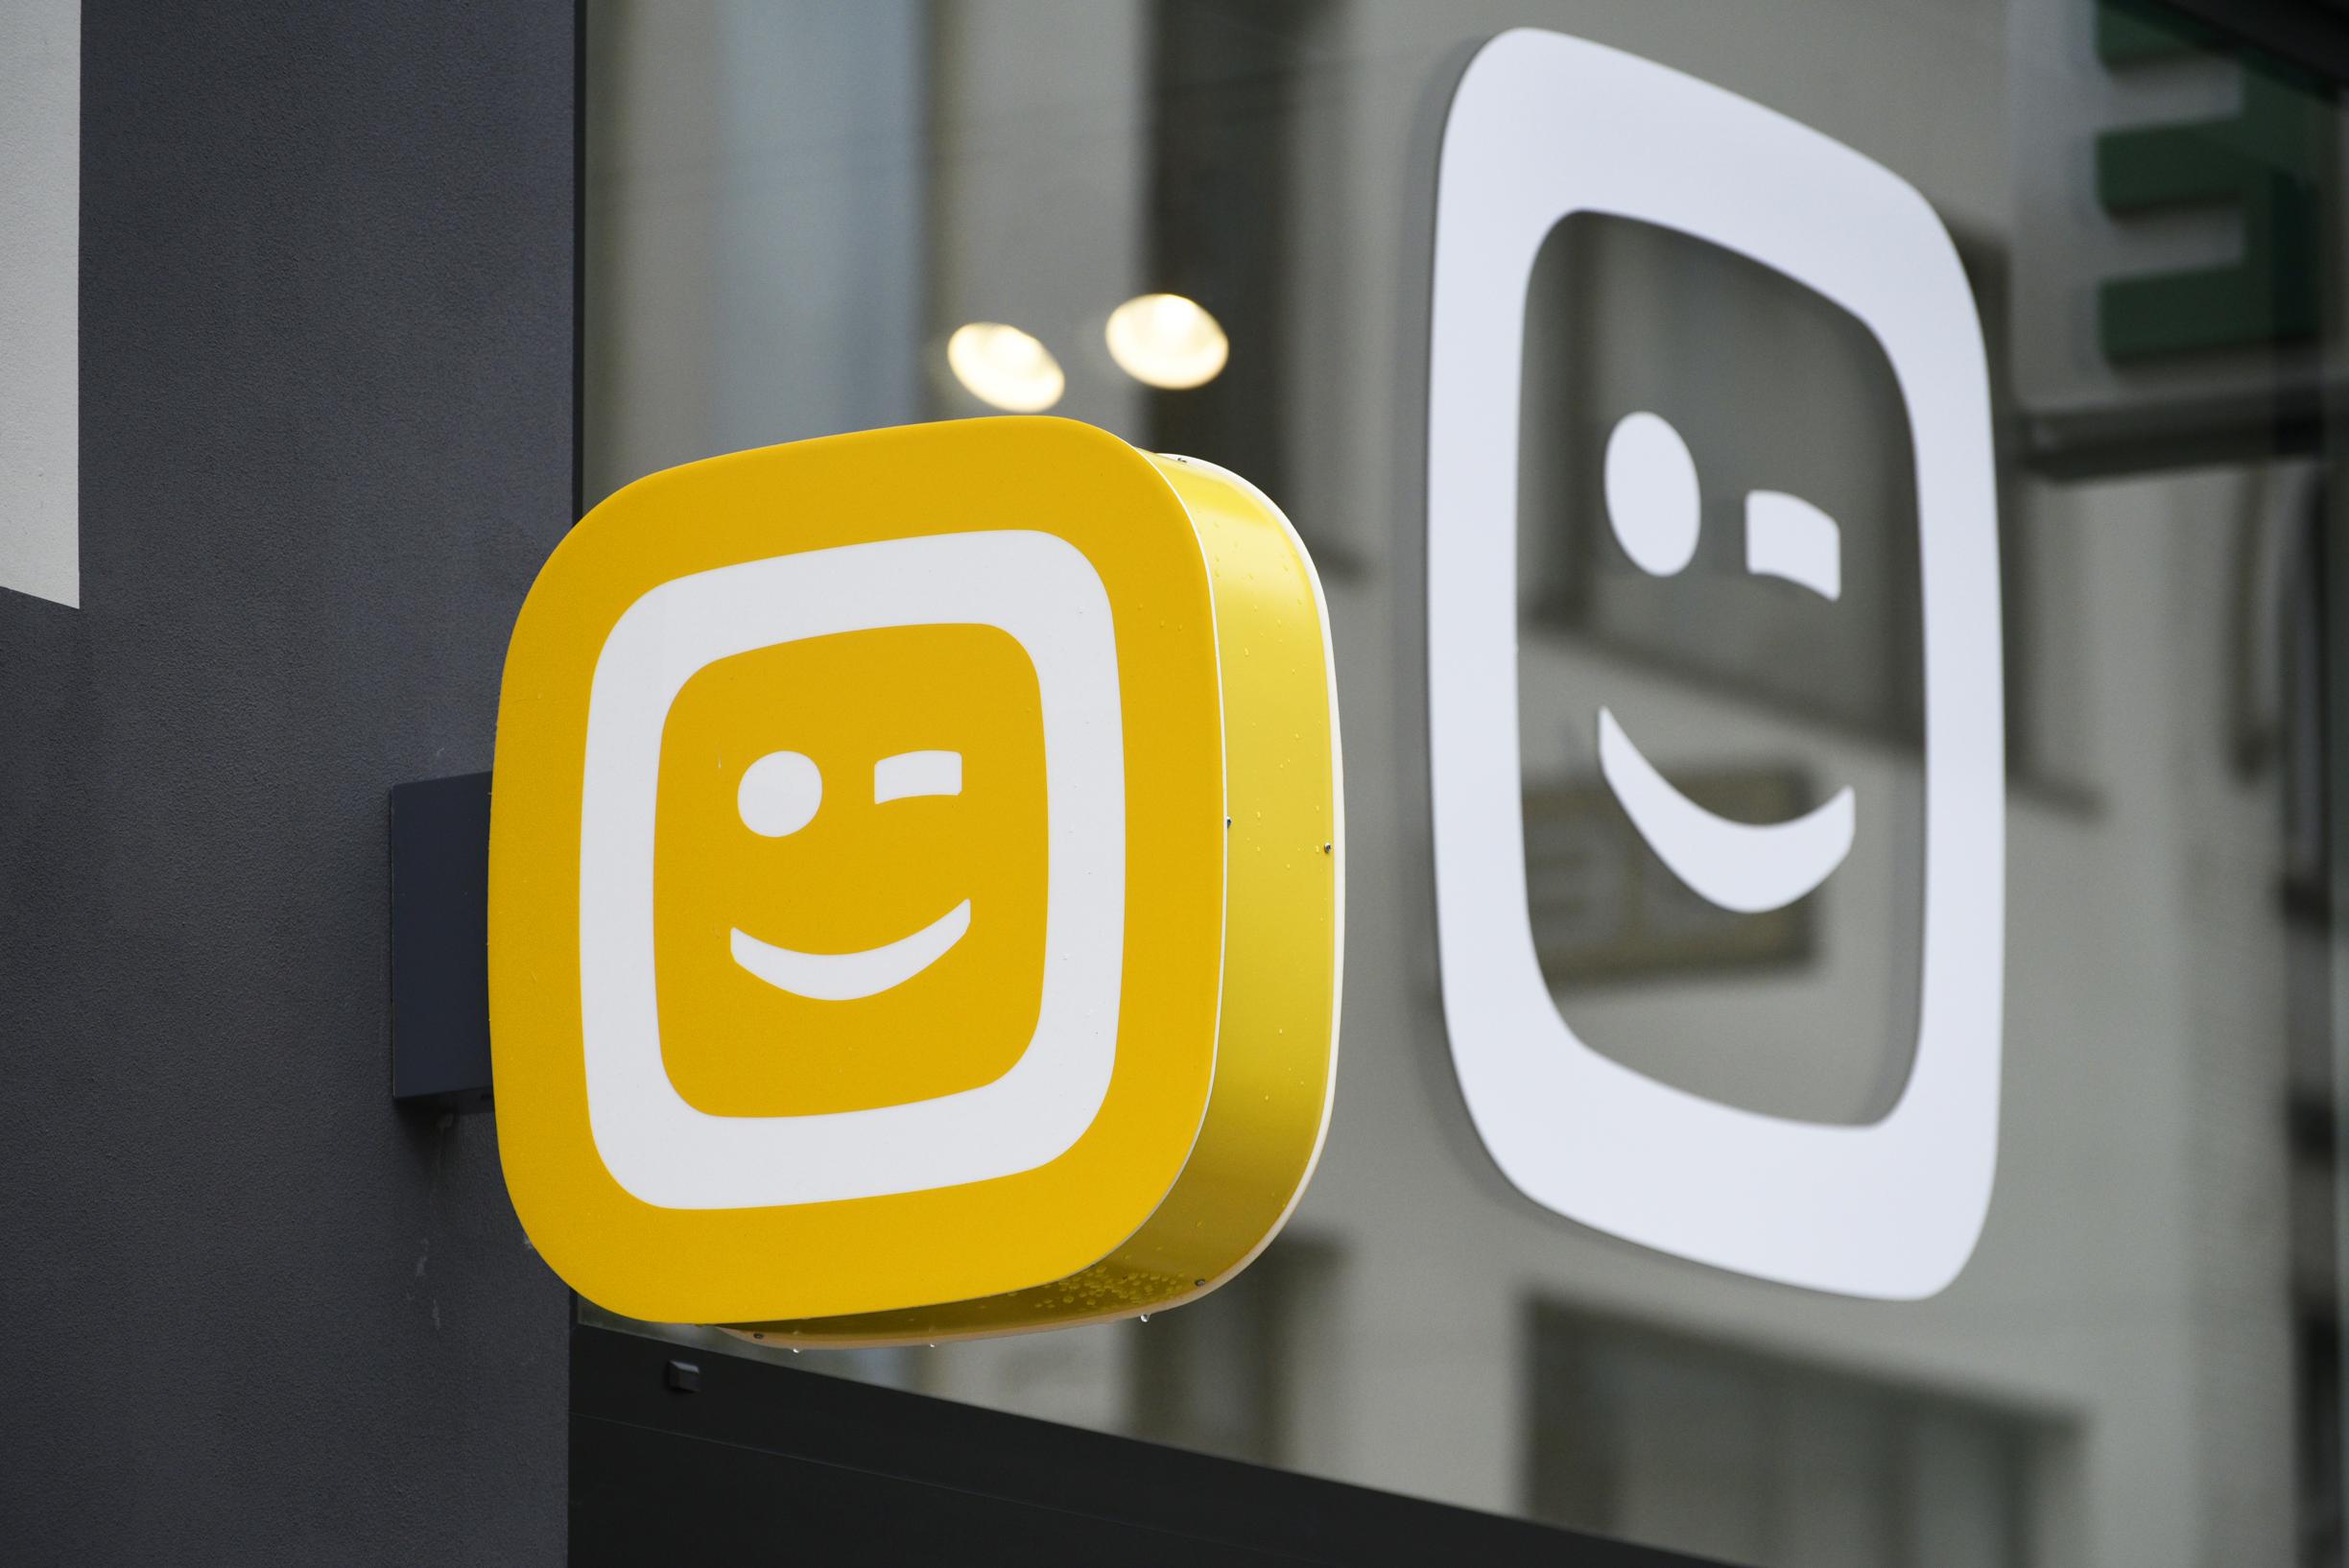 Telenet faces horror year with surge in complaints to Telecommunications Ombudsman Service, assures return to excellent service for customers.